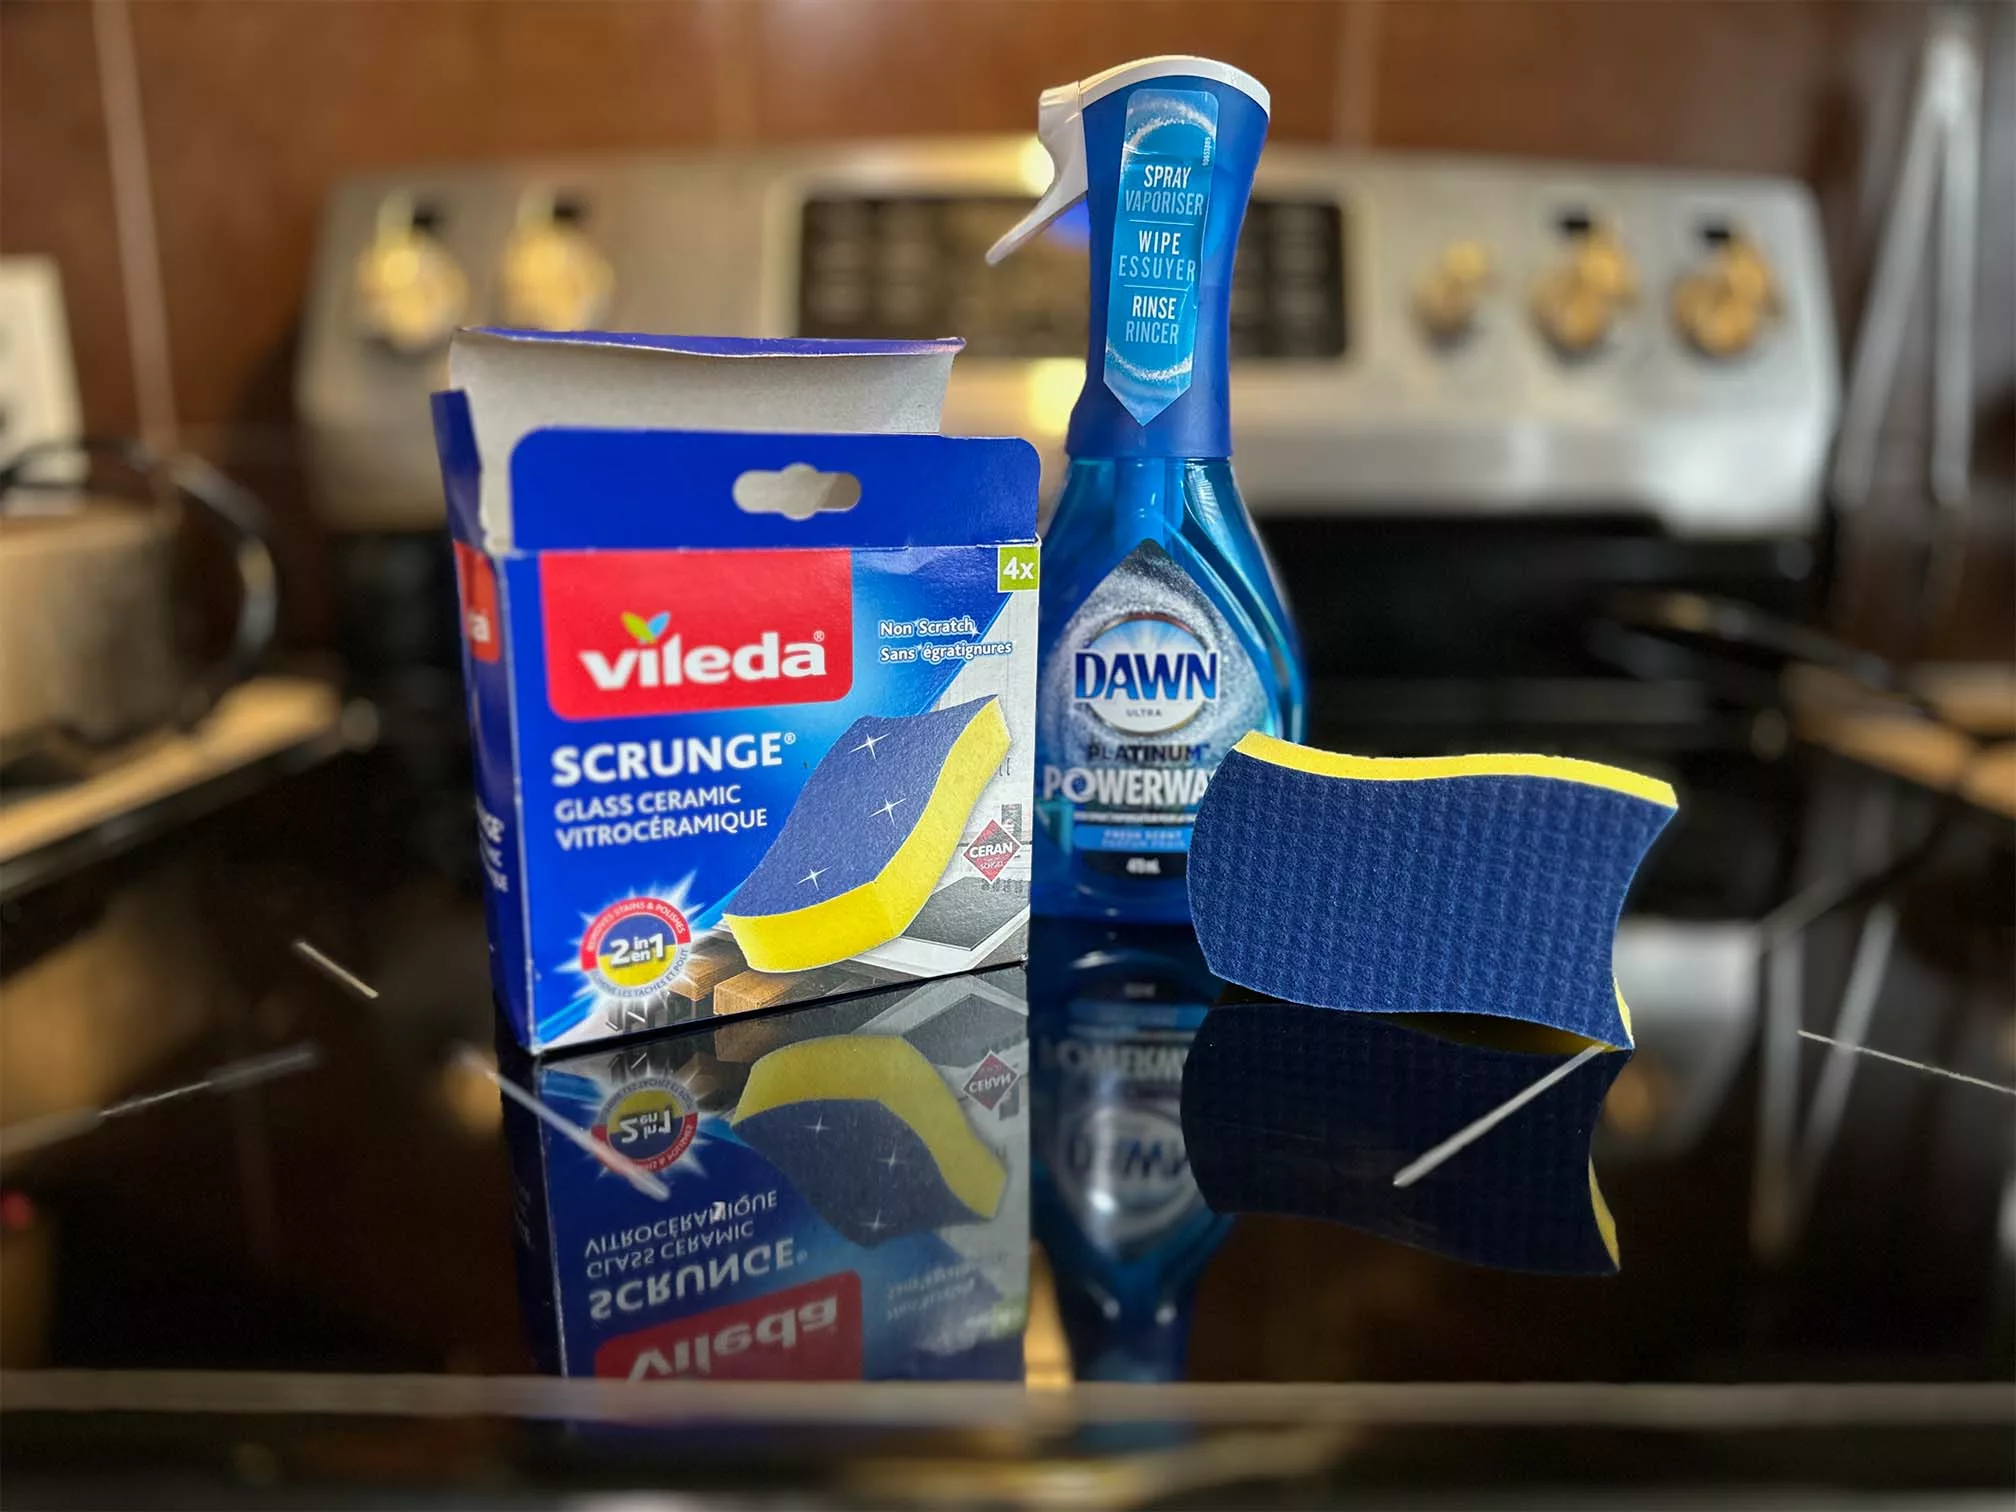 Glass And Ceramic Cooktop Cleaner